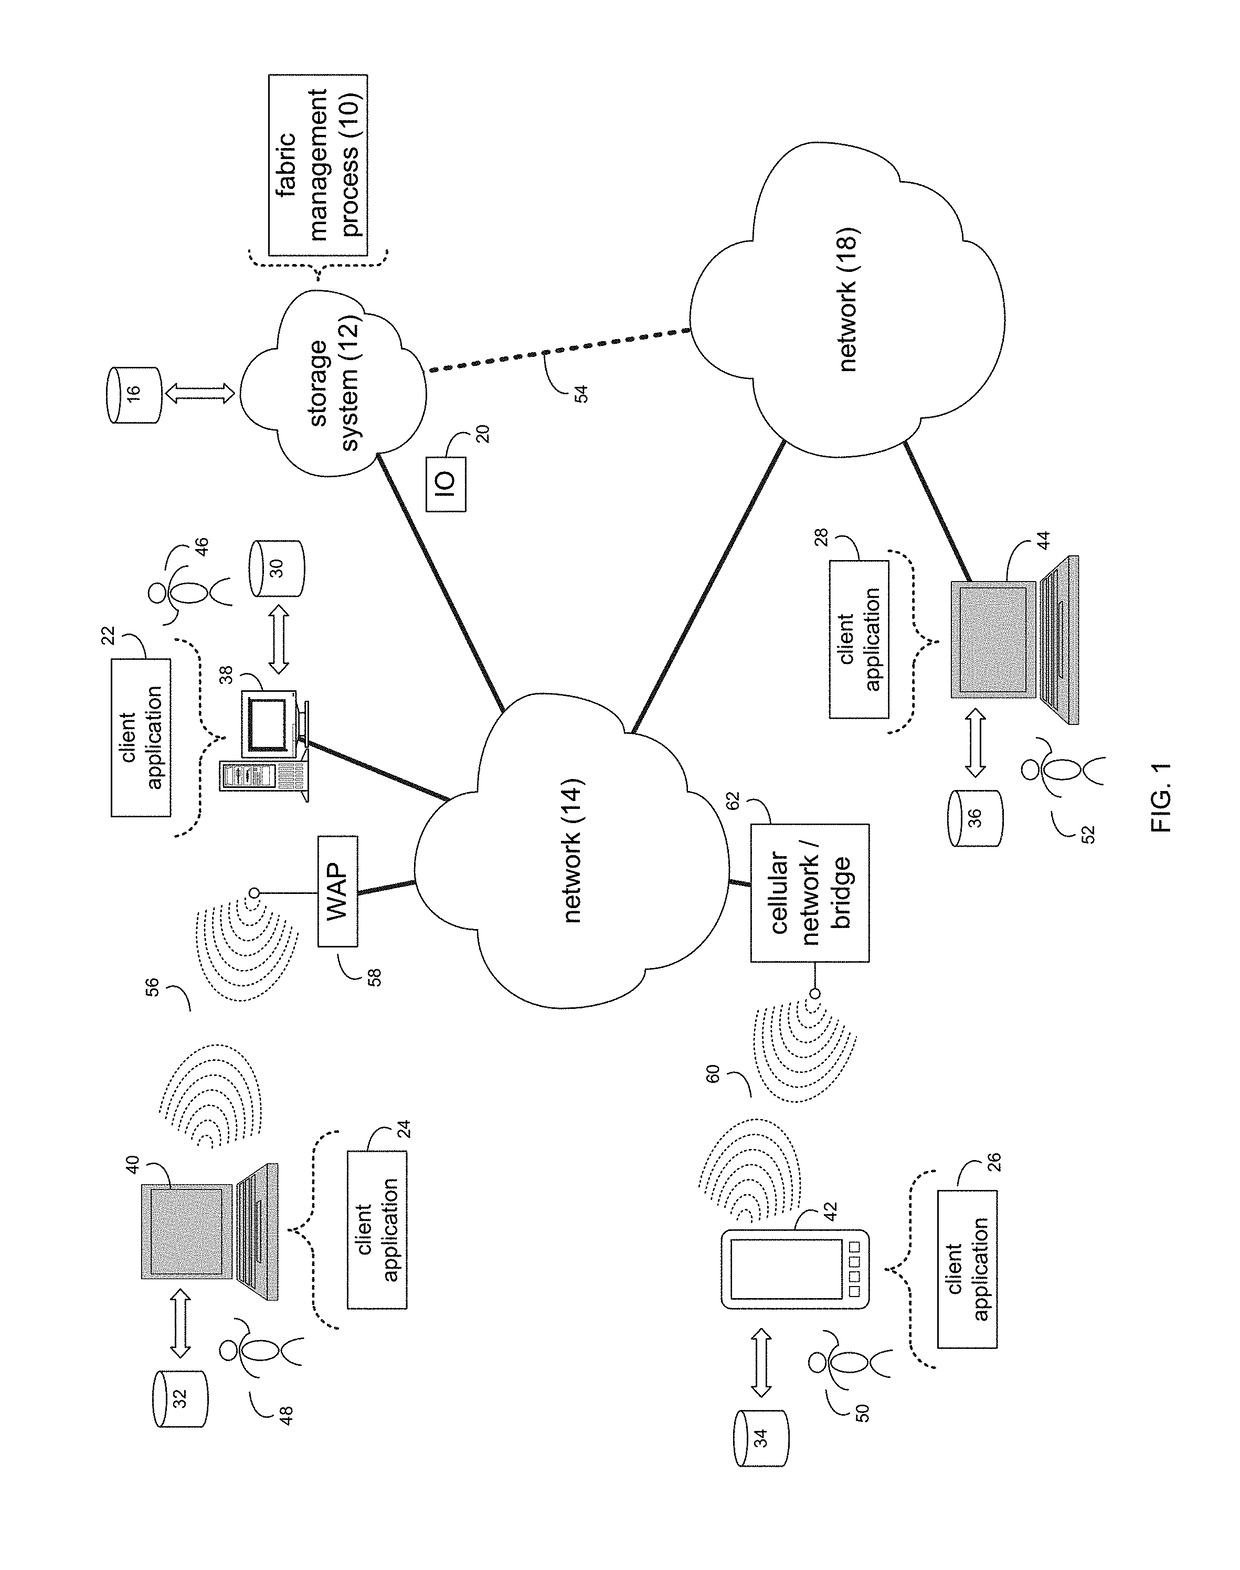 Fabric management system and method